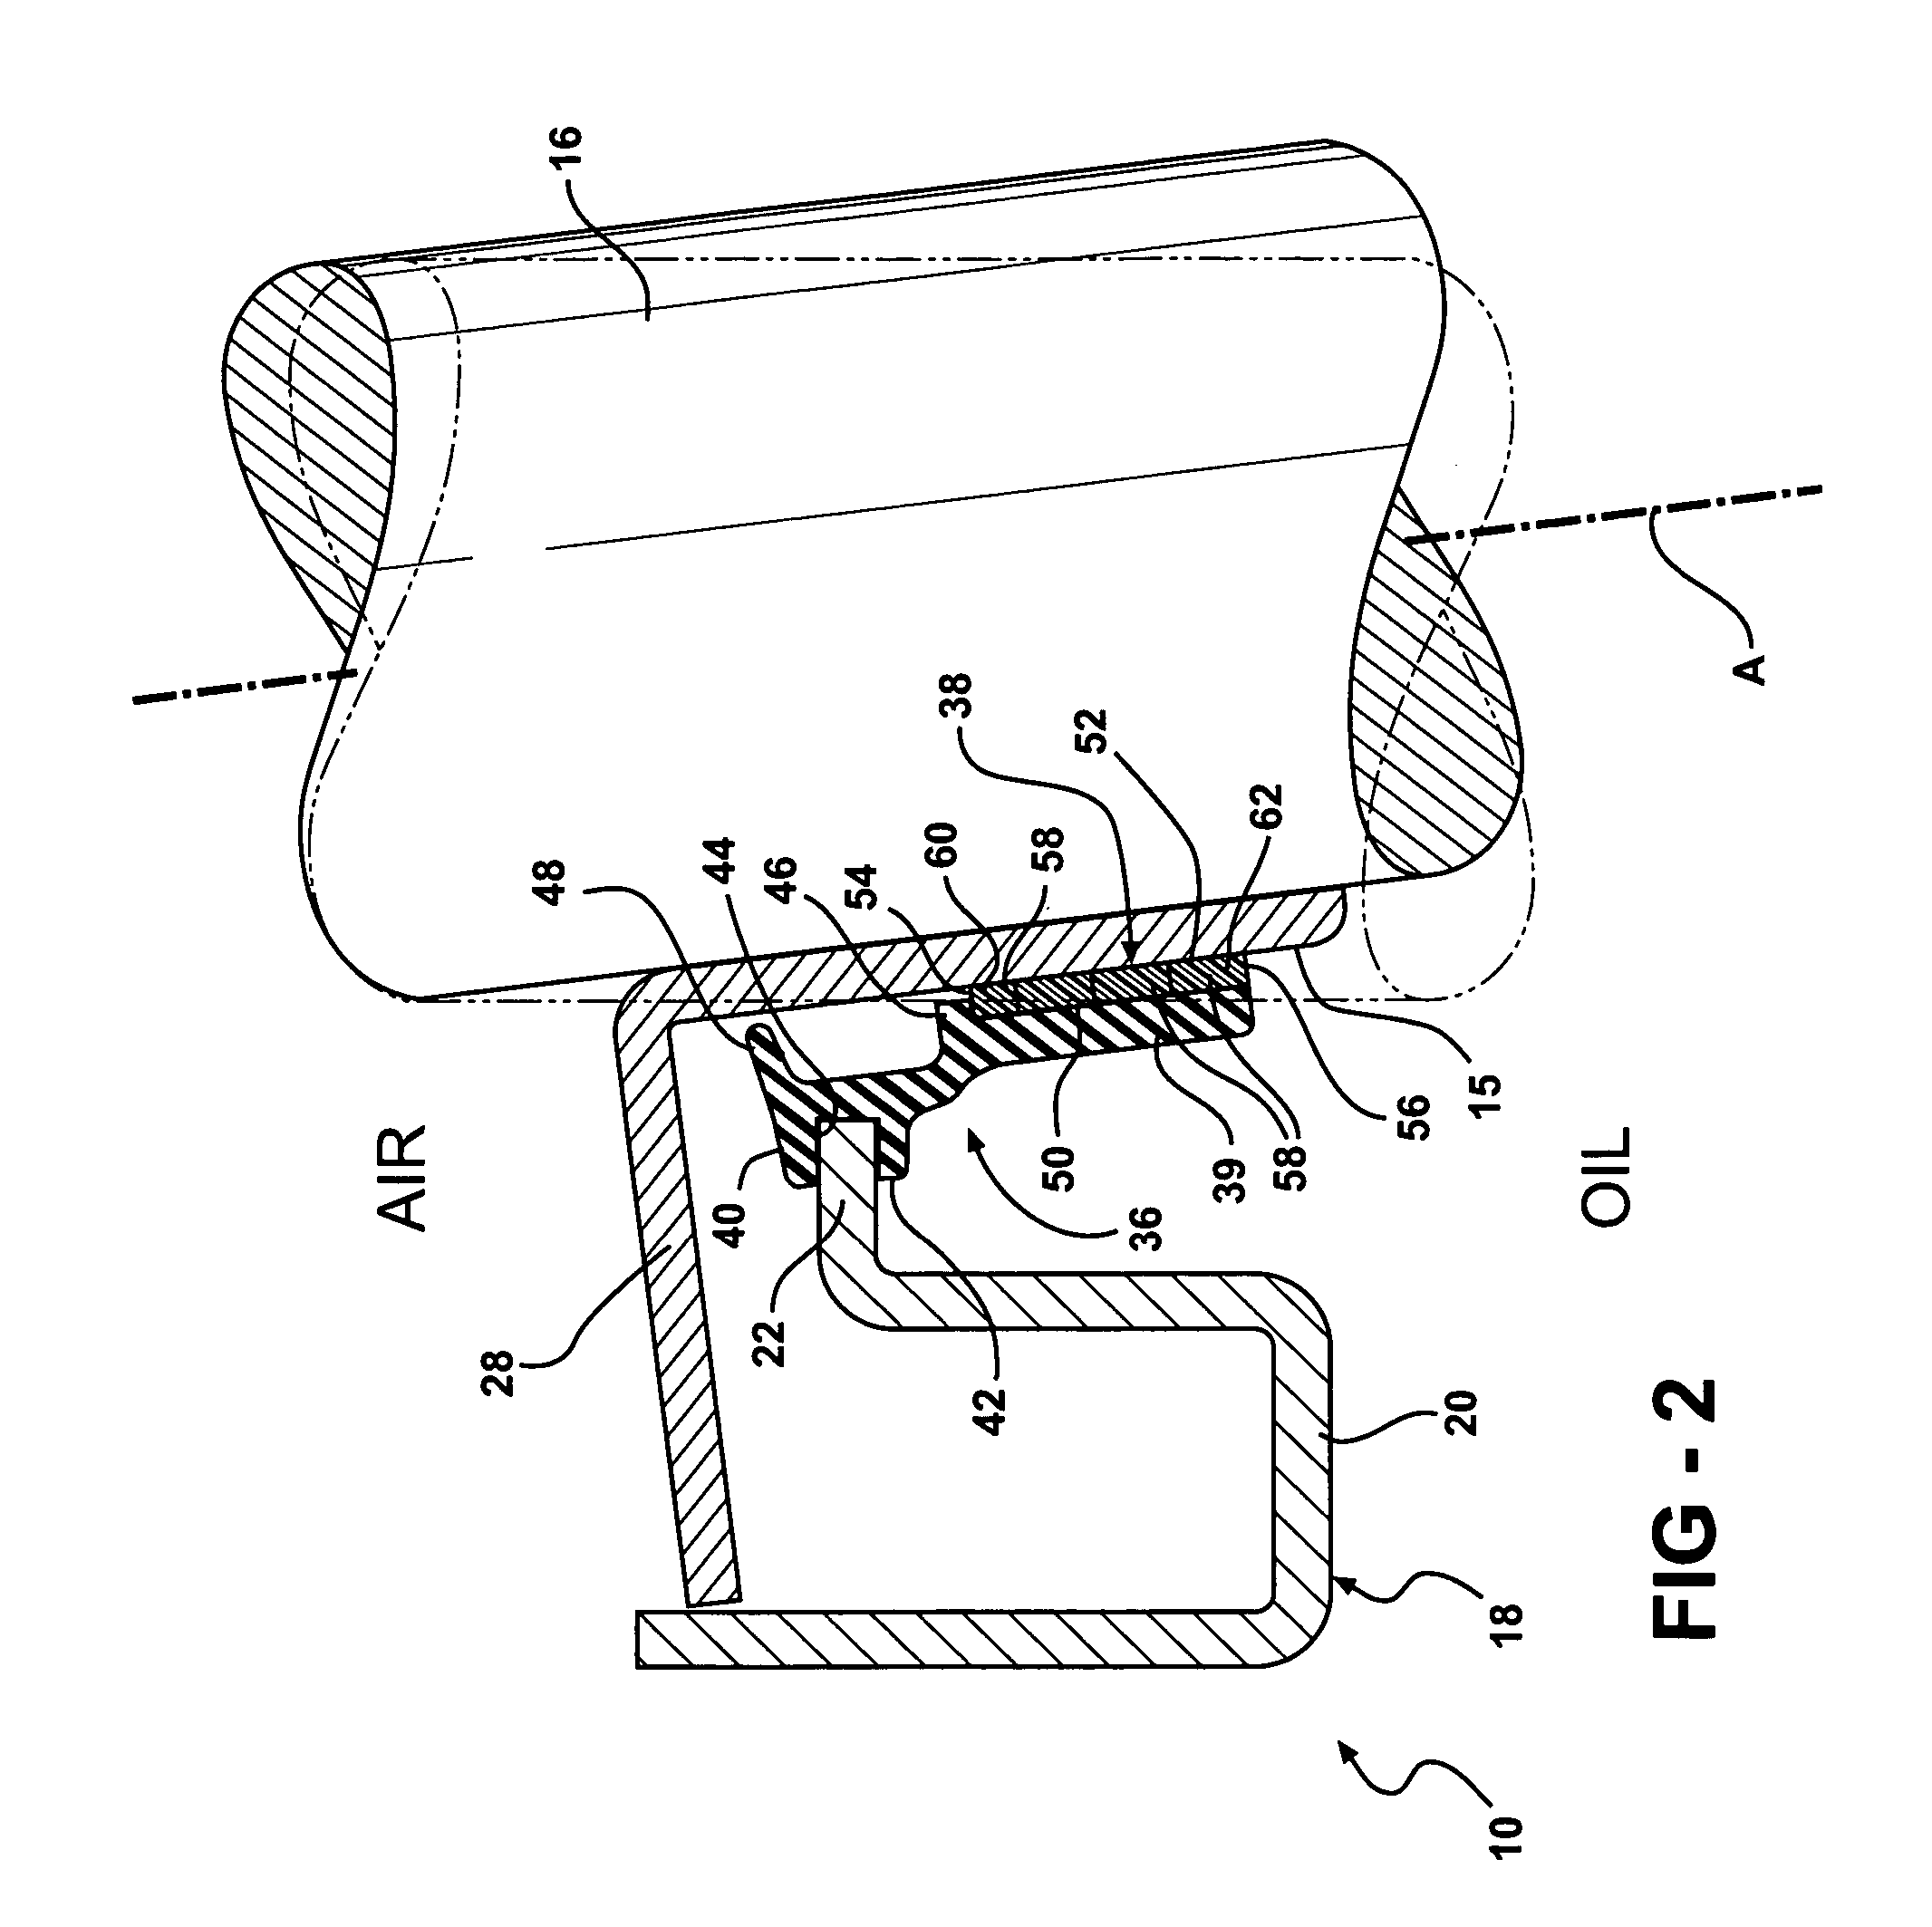 Seal assembly and method of manufacturing the same